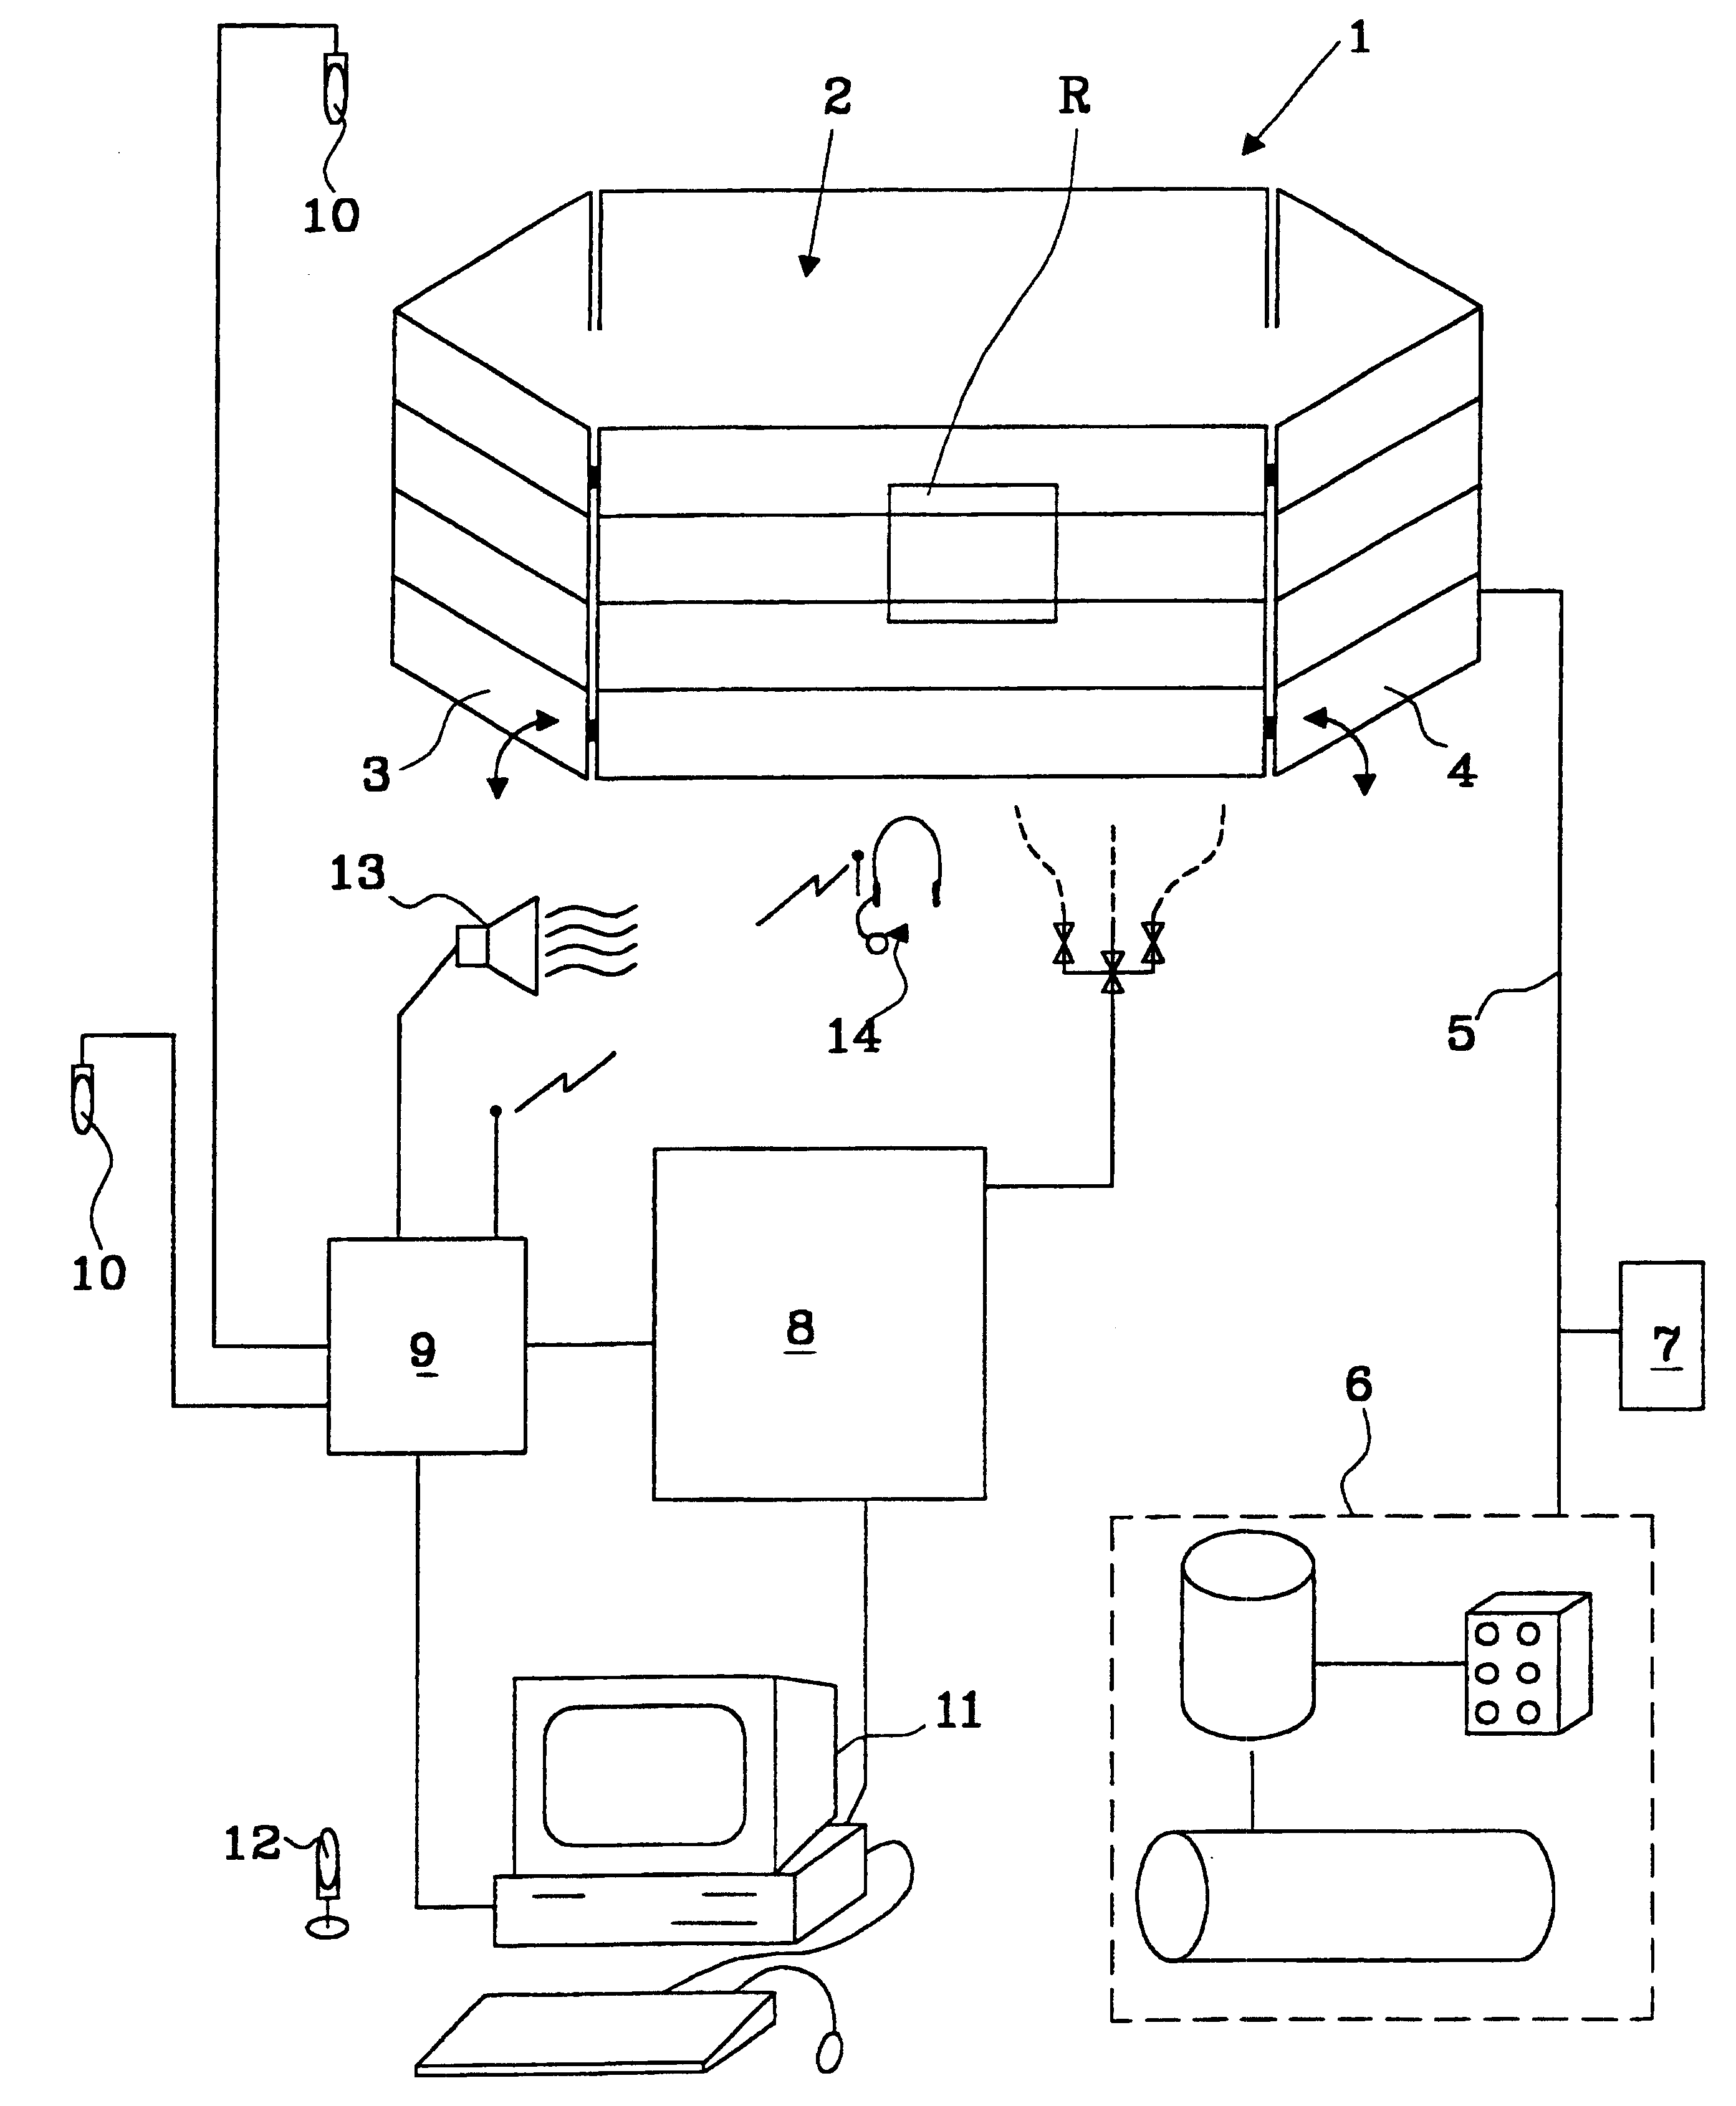 System and method for controlling and monitoring the operation of an automatic milking system